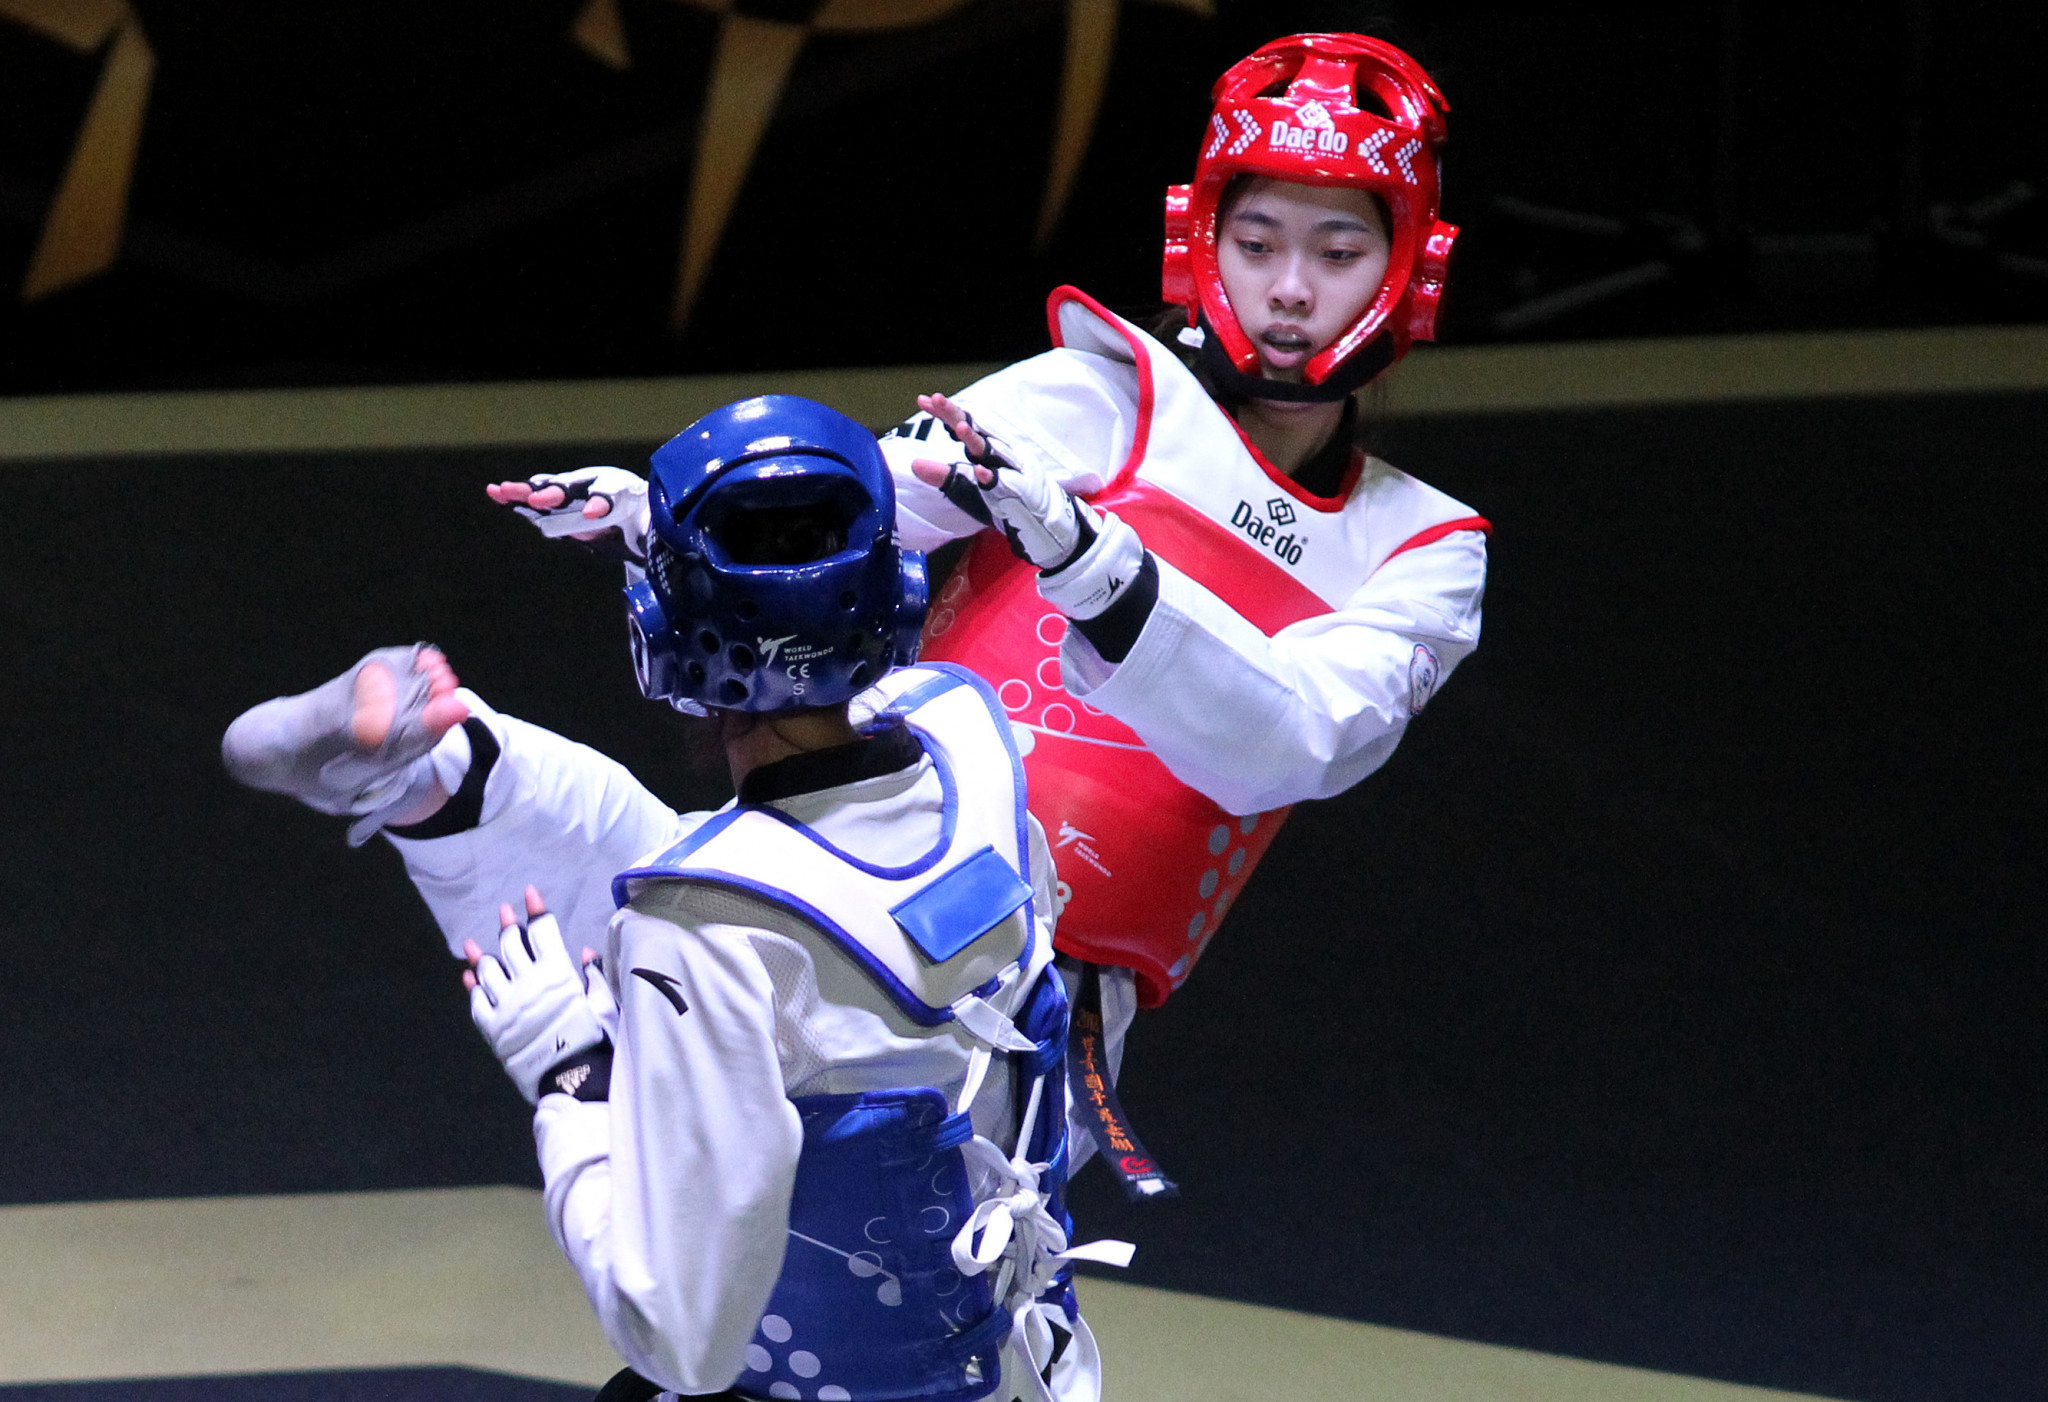 Luo had won three World Taekwondo Grand Prix titles earlier in the year and she continued her winning run in Mexico by defeating Chinese Taipei's Chia-ling Lo in the final ©Getty Images